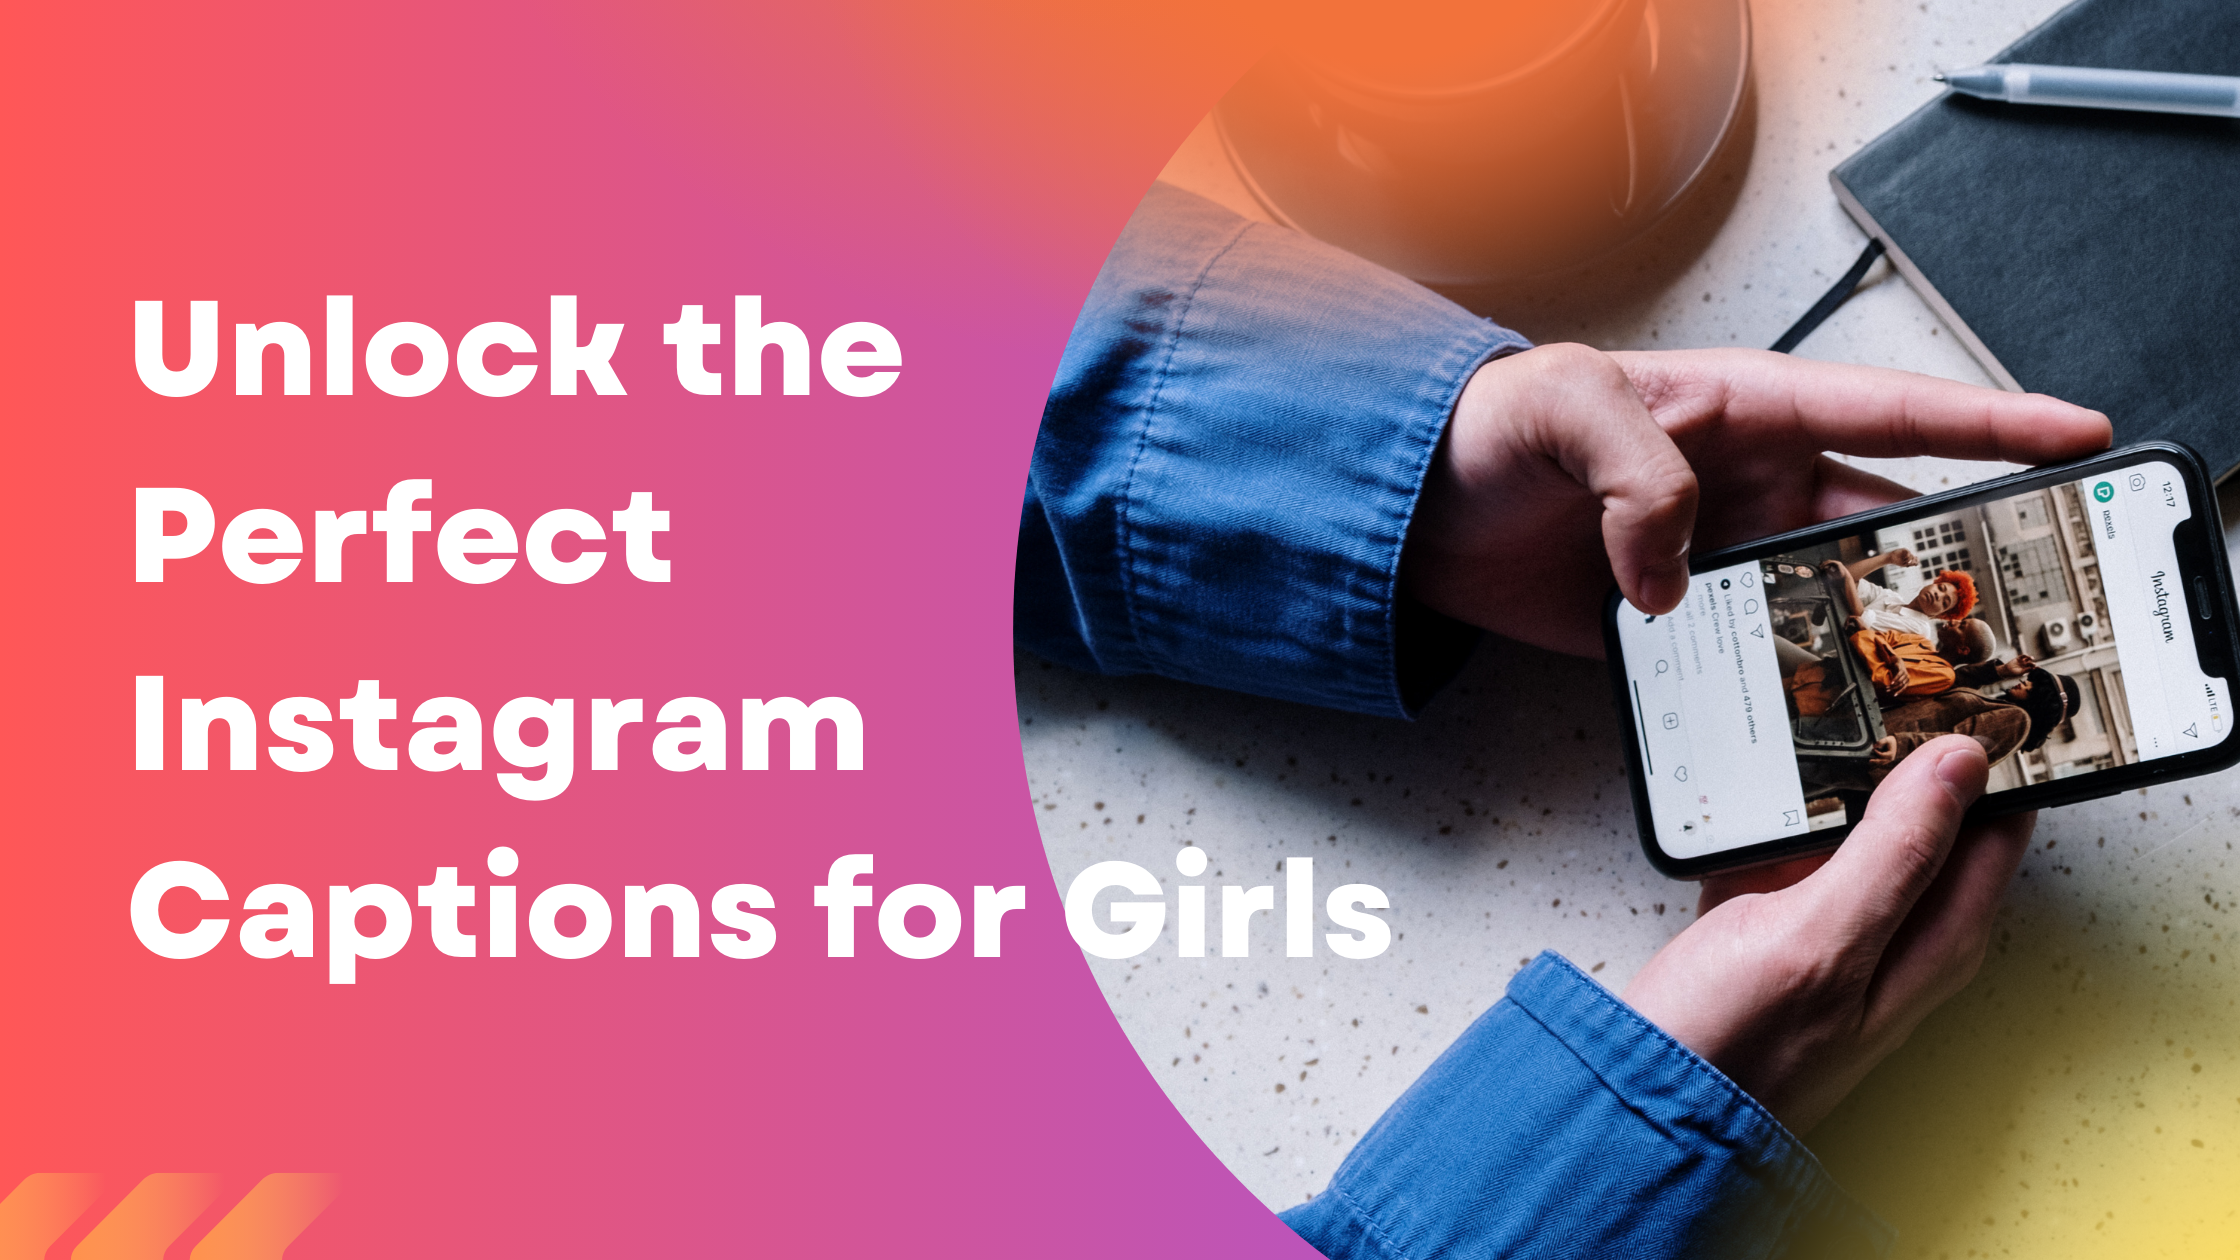 Unlock the Perfect Instagram Captions for Girls: Inspire, Empower, and Connect!